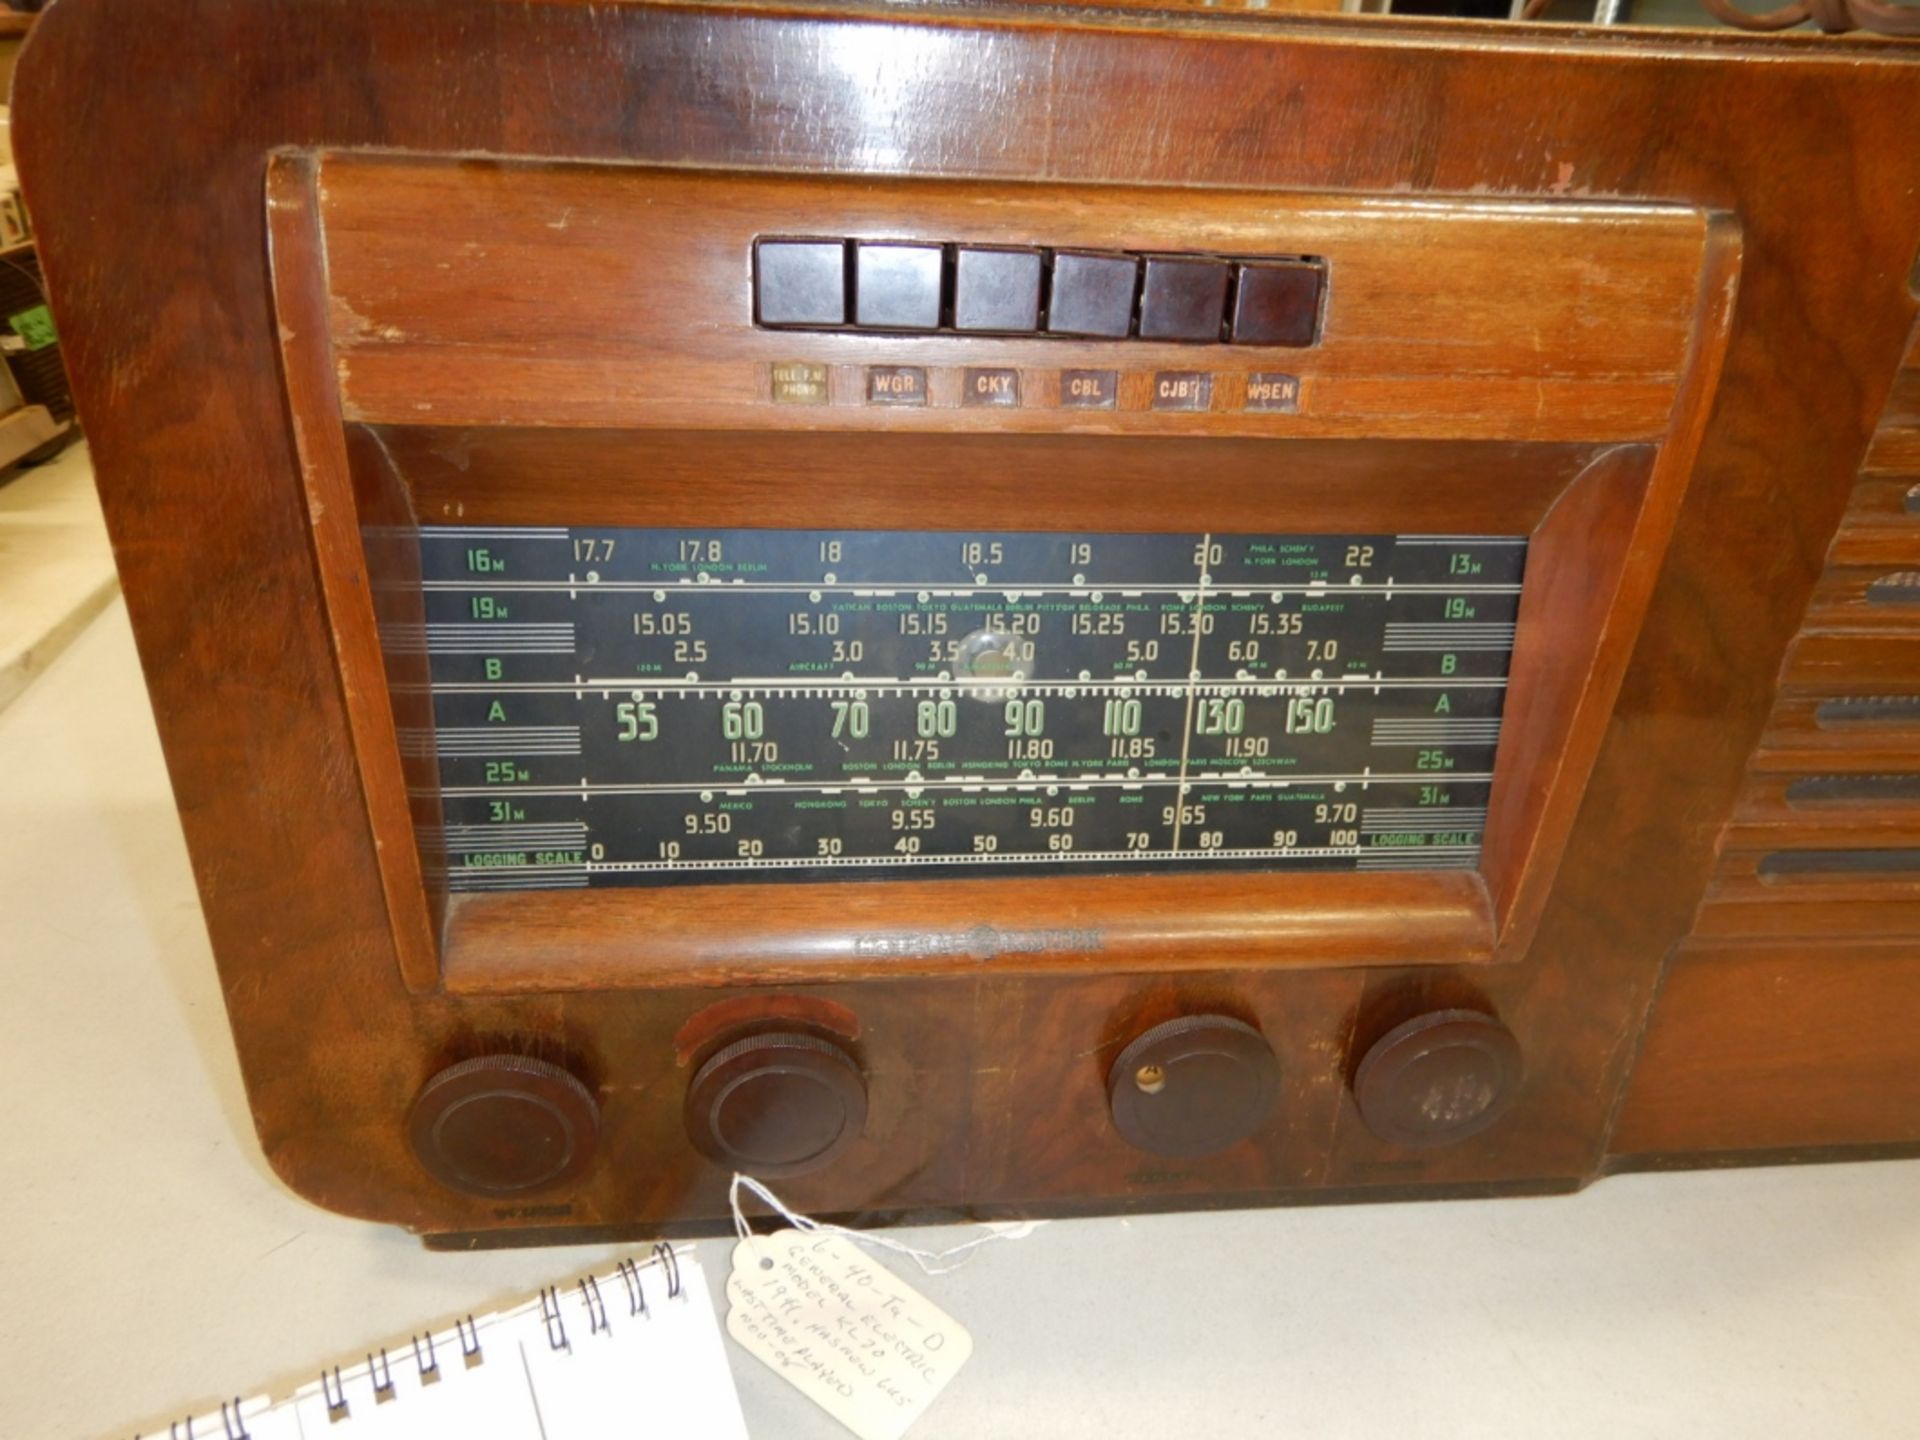 VINTAGE GE 1940'S BEAM-A-SCOPE RADIO NO AIREAL NO GROUND REQUIREDMODEL KL70; SERIAL # 346 WOOD CASE - Image 2 of 3